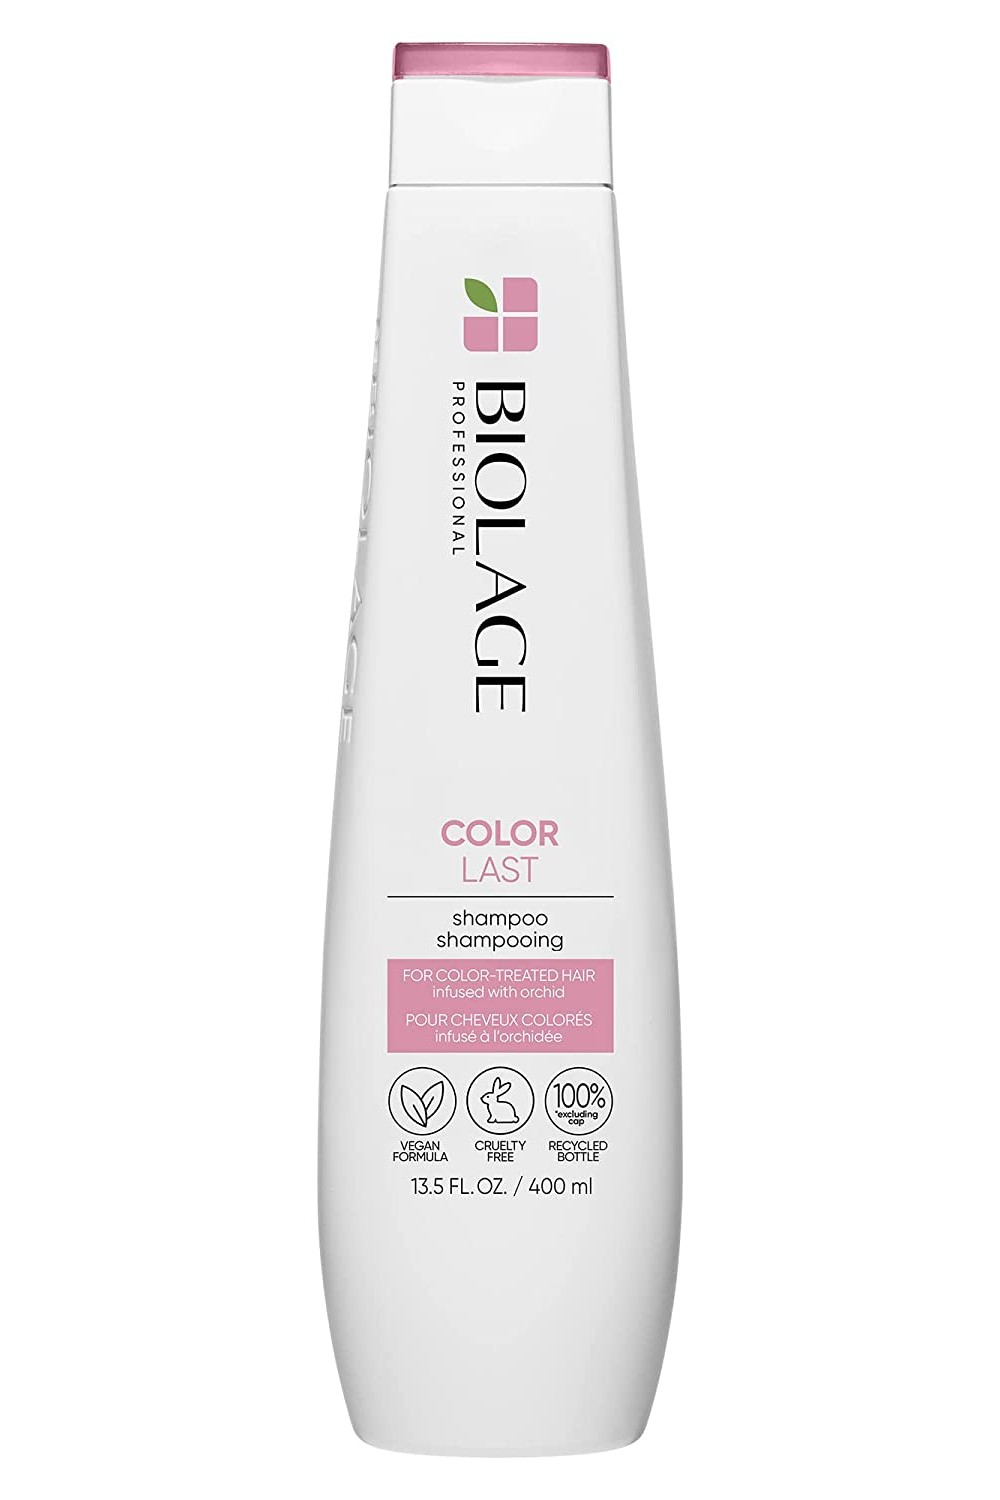 Best Shampoos and Conditioners Reviews |  BIOLAGE Color Last Shampoo Review